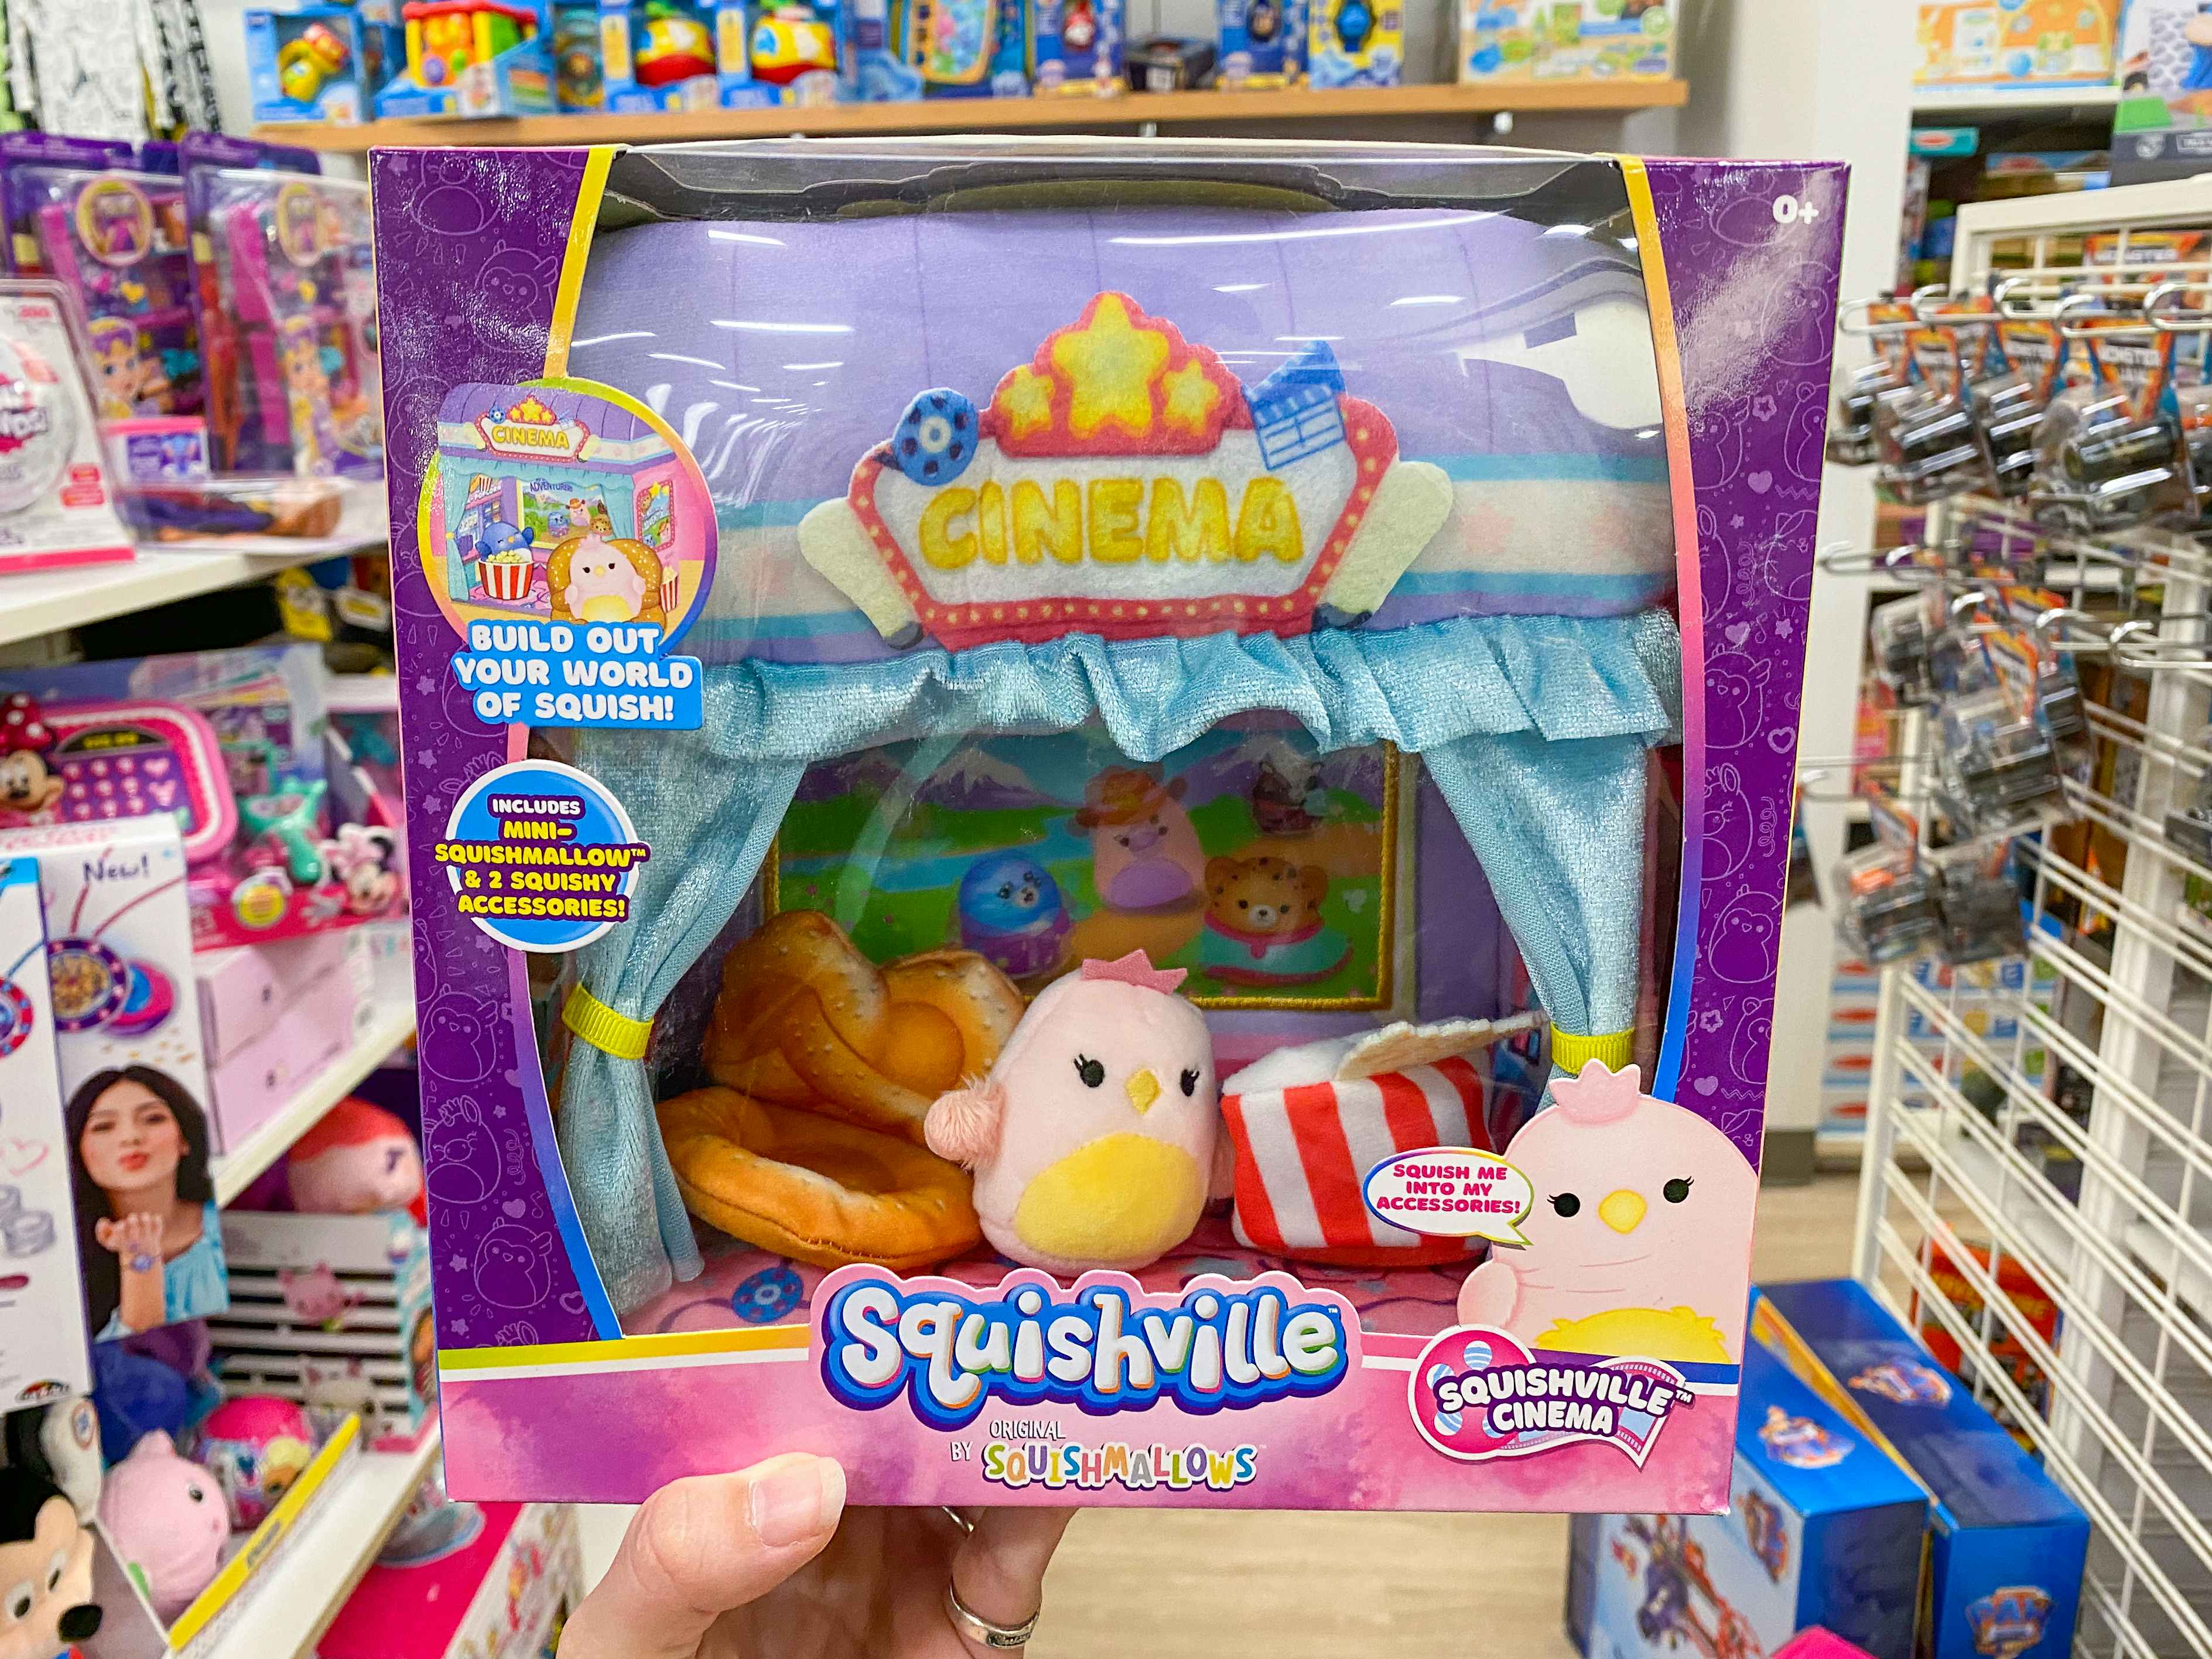 Someone holding up a Squishmallows Squishville Cinema collectible set in a toy aisle